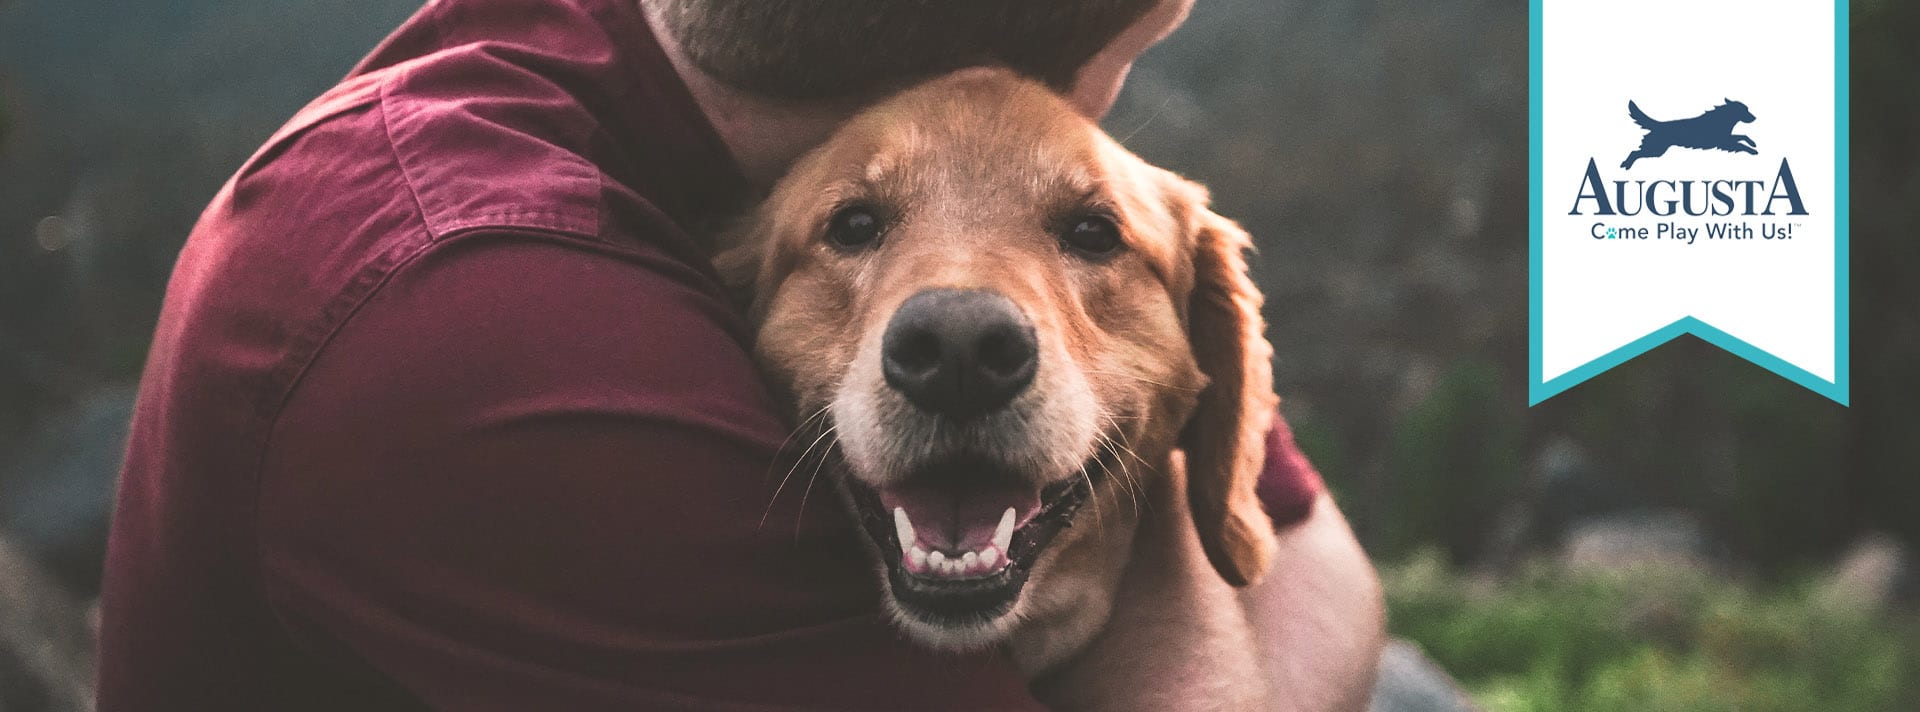 An image of a man hugging his therapy dog with banner with text "Augusta: Come Play With Us!" featured in a blog banner for August Dog Training